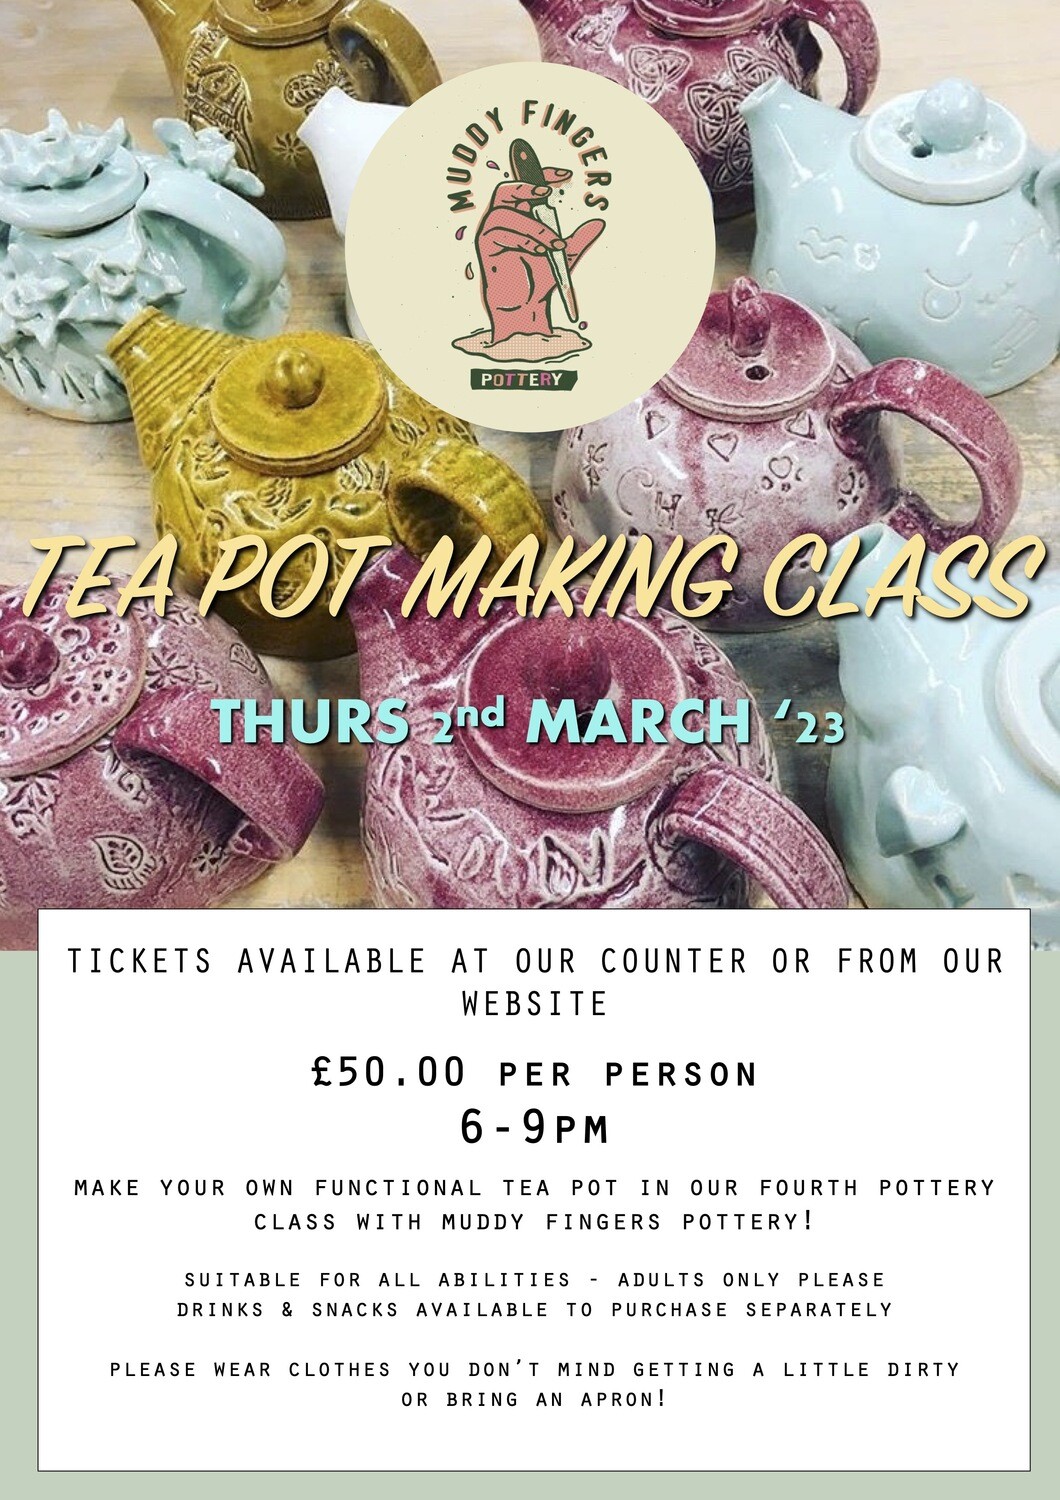 Tea Pot making session at Hive Thursday 2nd March '23, 6pm - 9pm